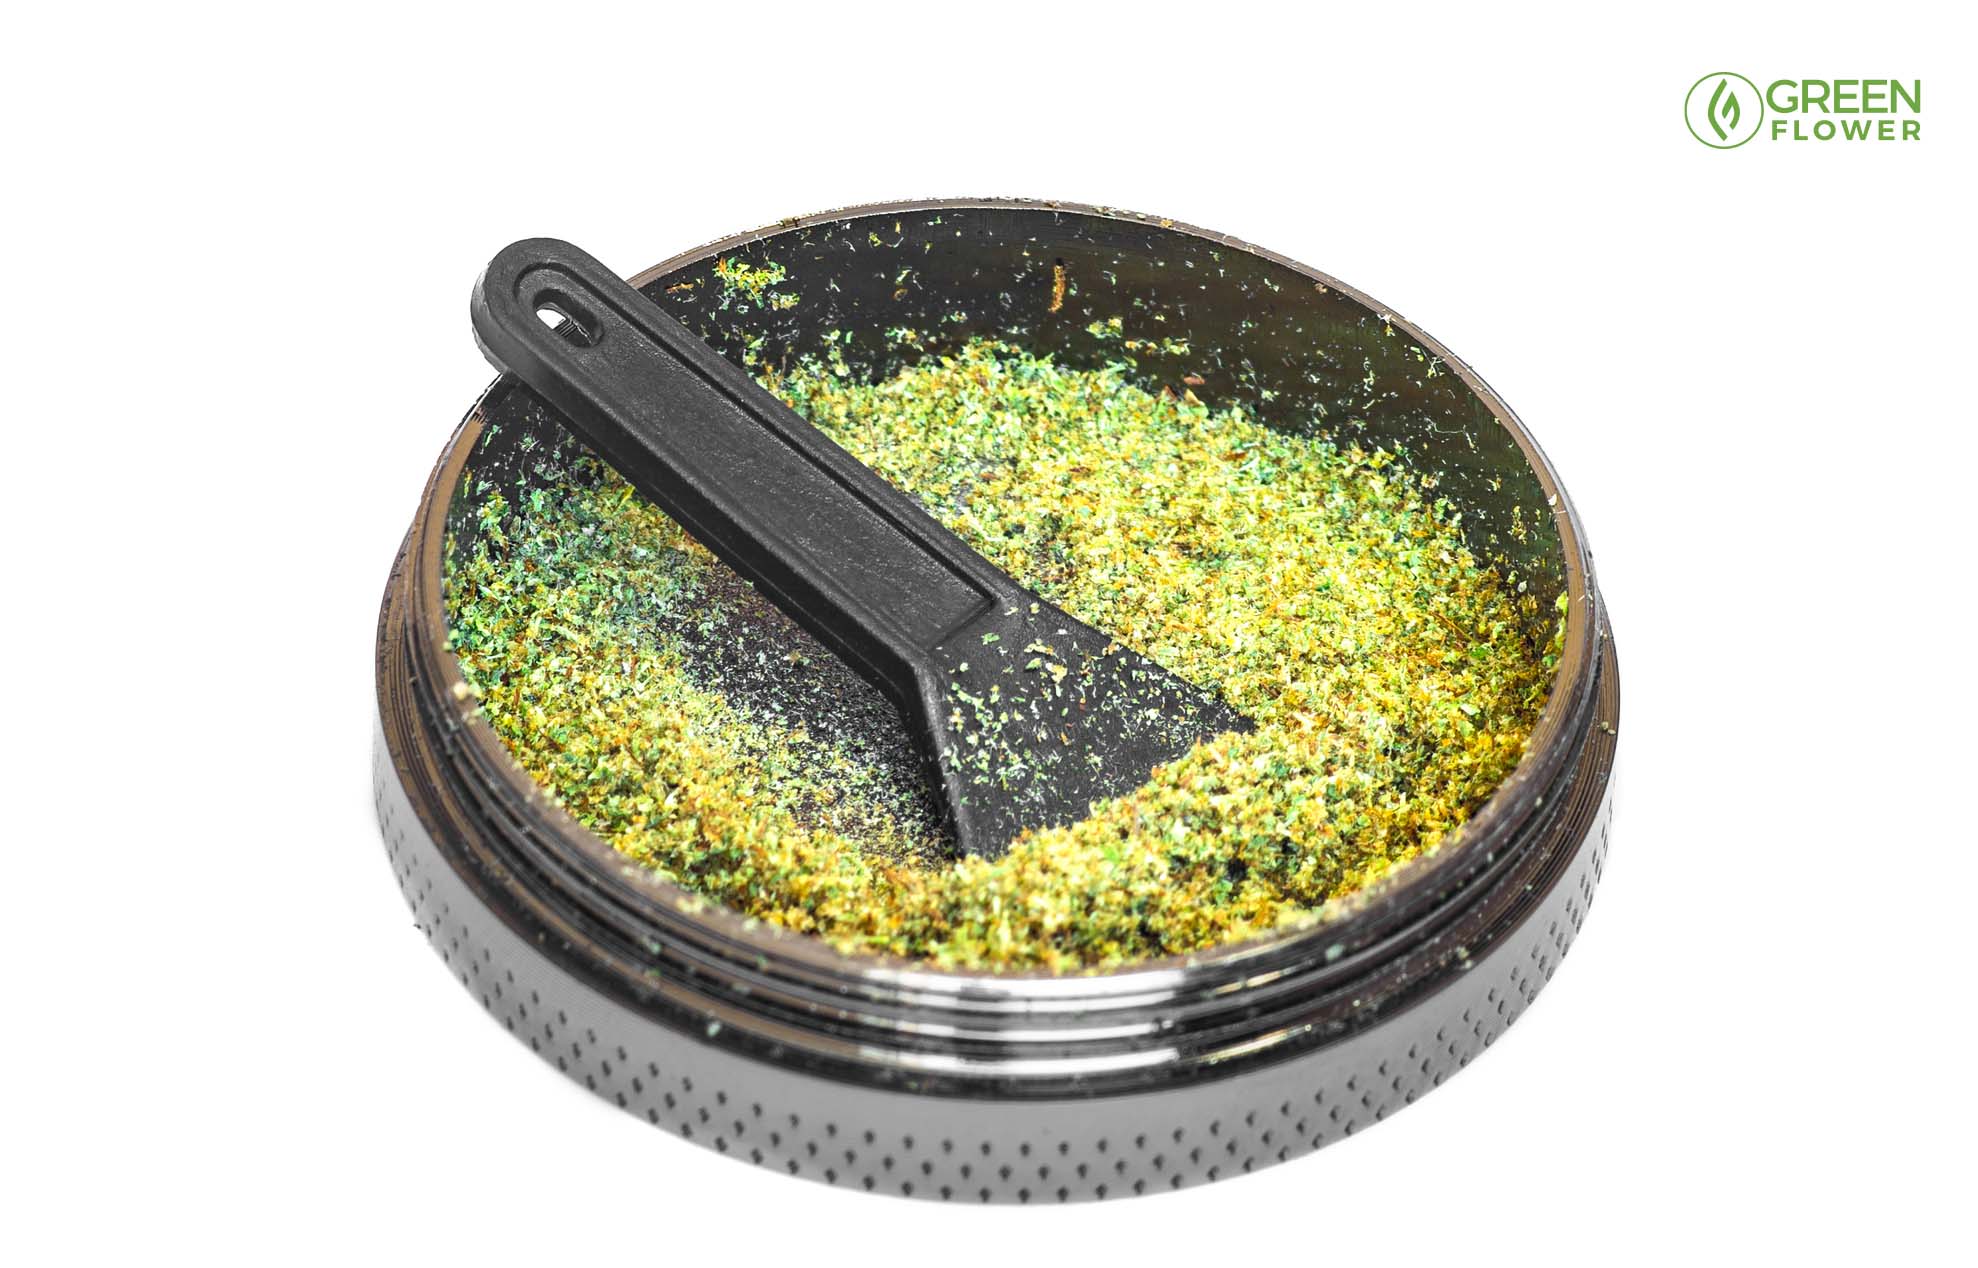 Using A Kief Grinder To Collect Cannabinoids